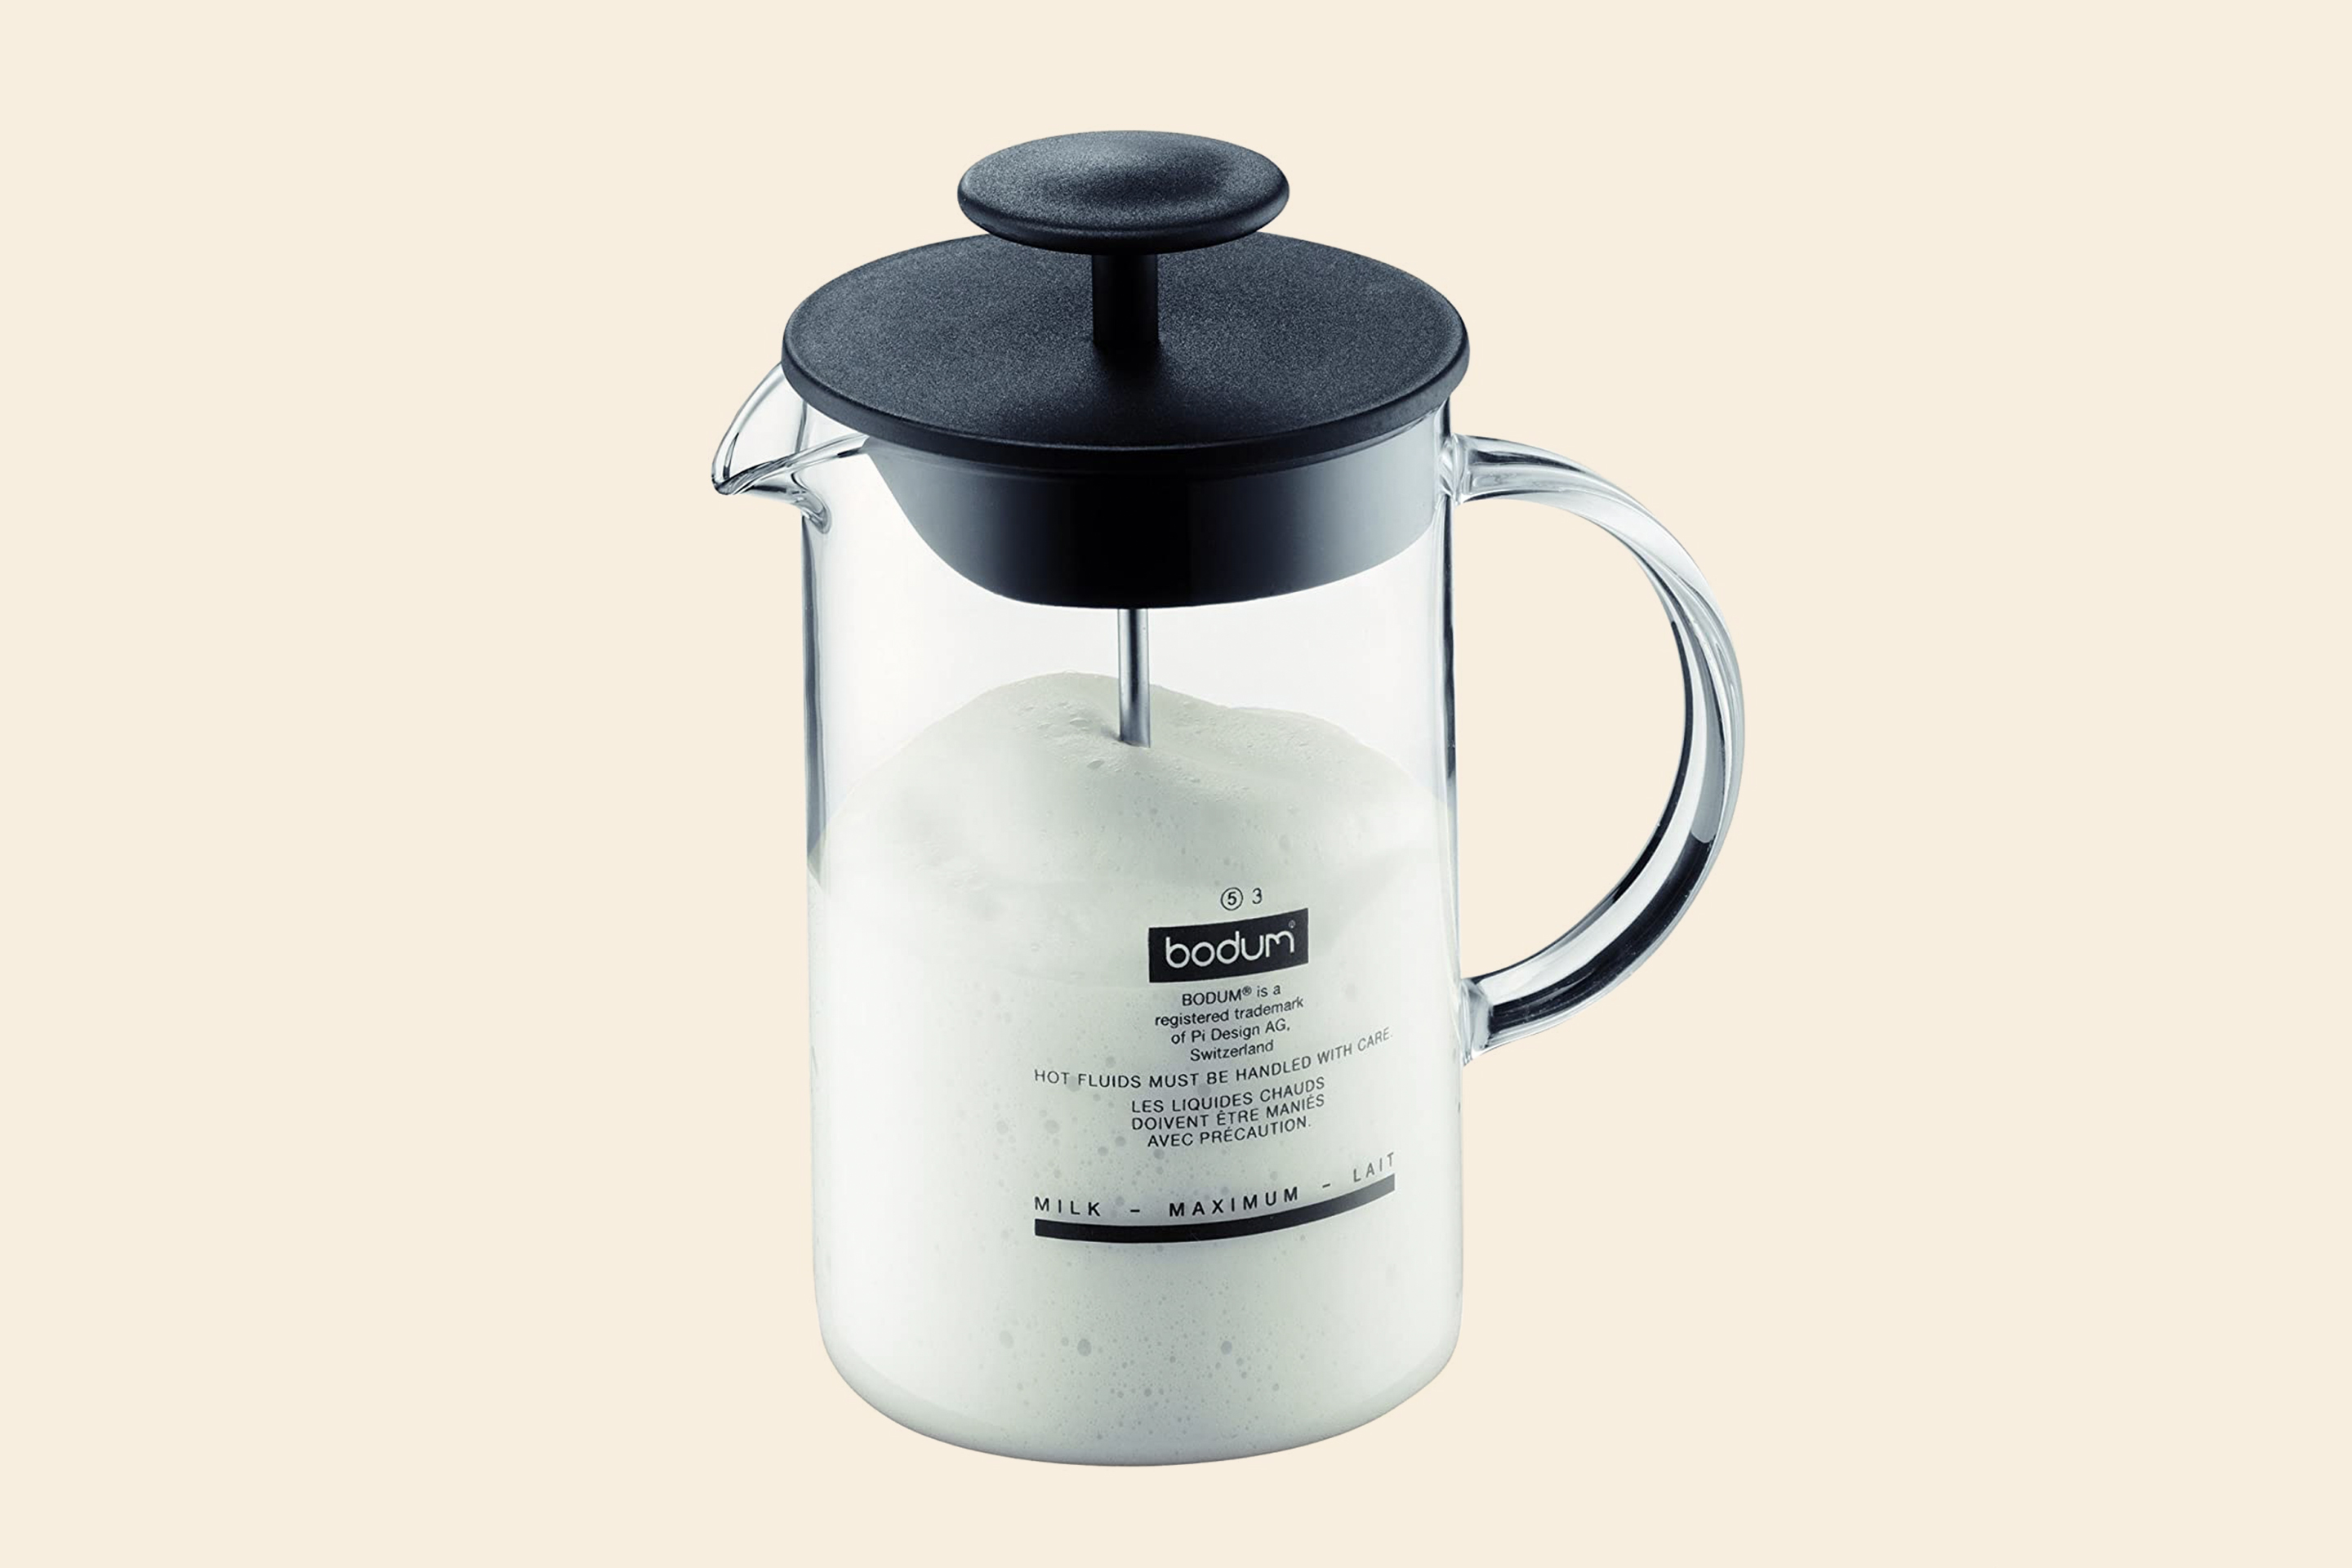 Shoppers Love the Bonsenkitchen Milk Frother